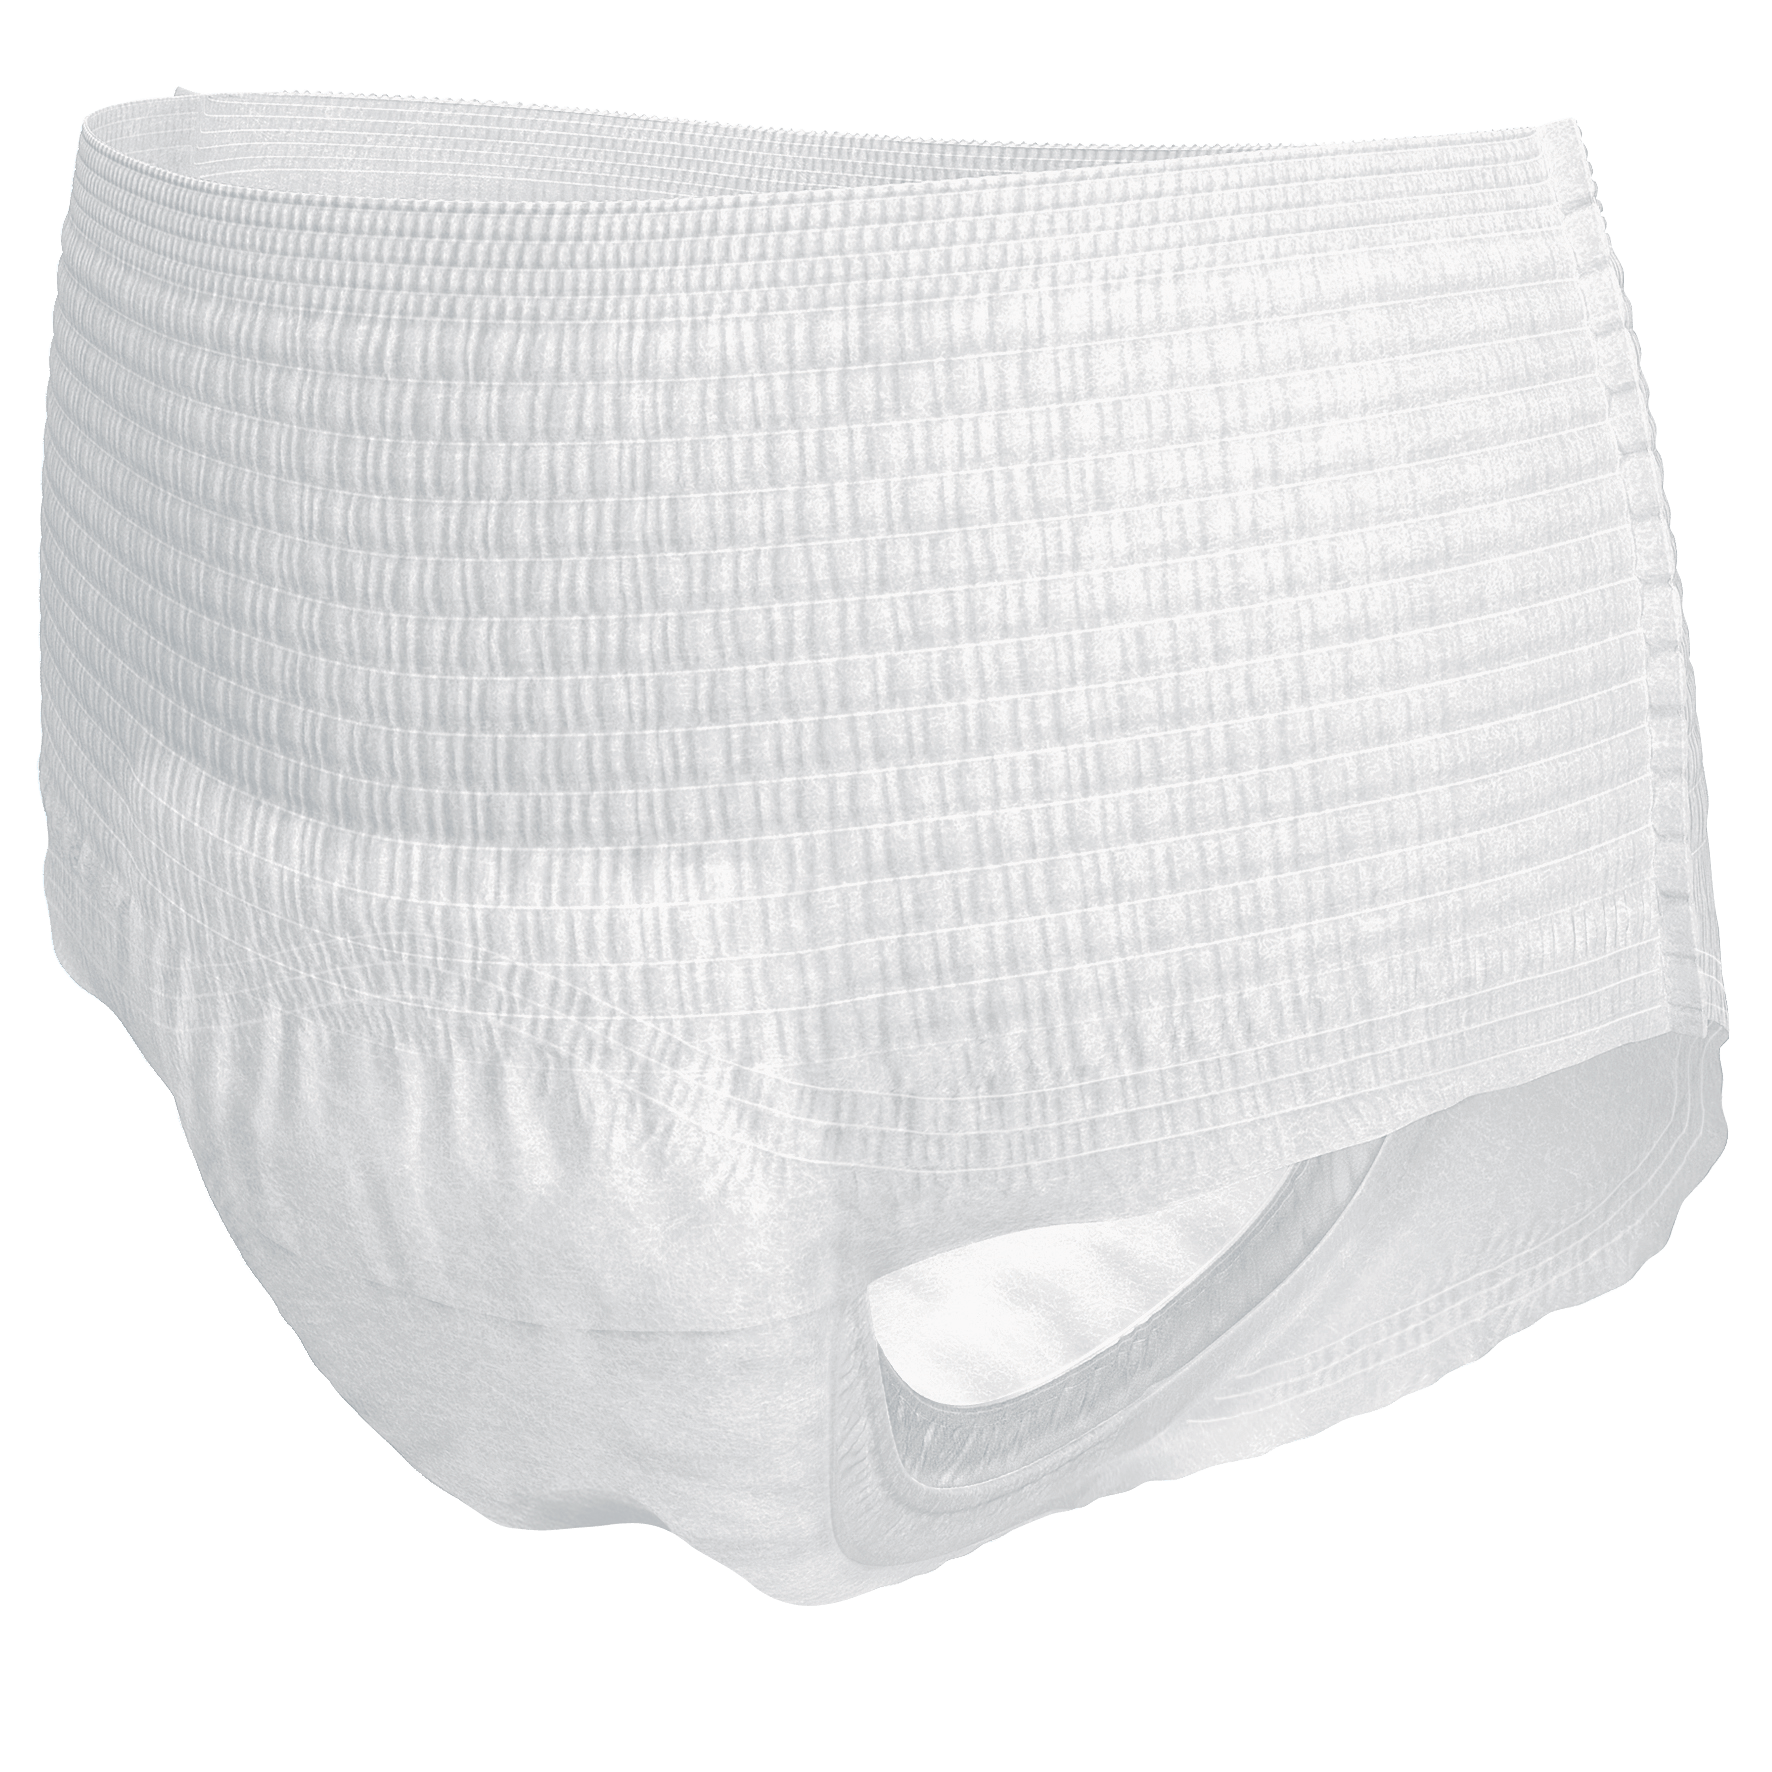 https://www.medprodirect.net/wp-content/uploads/2019/01/TENA-Protective-Underwear-72235-72325-72427.png